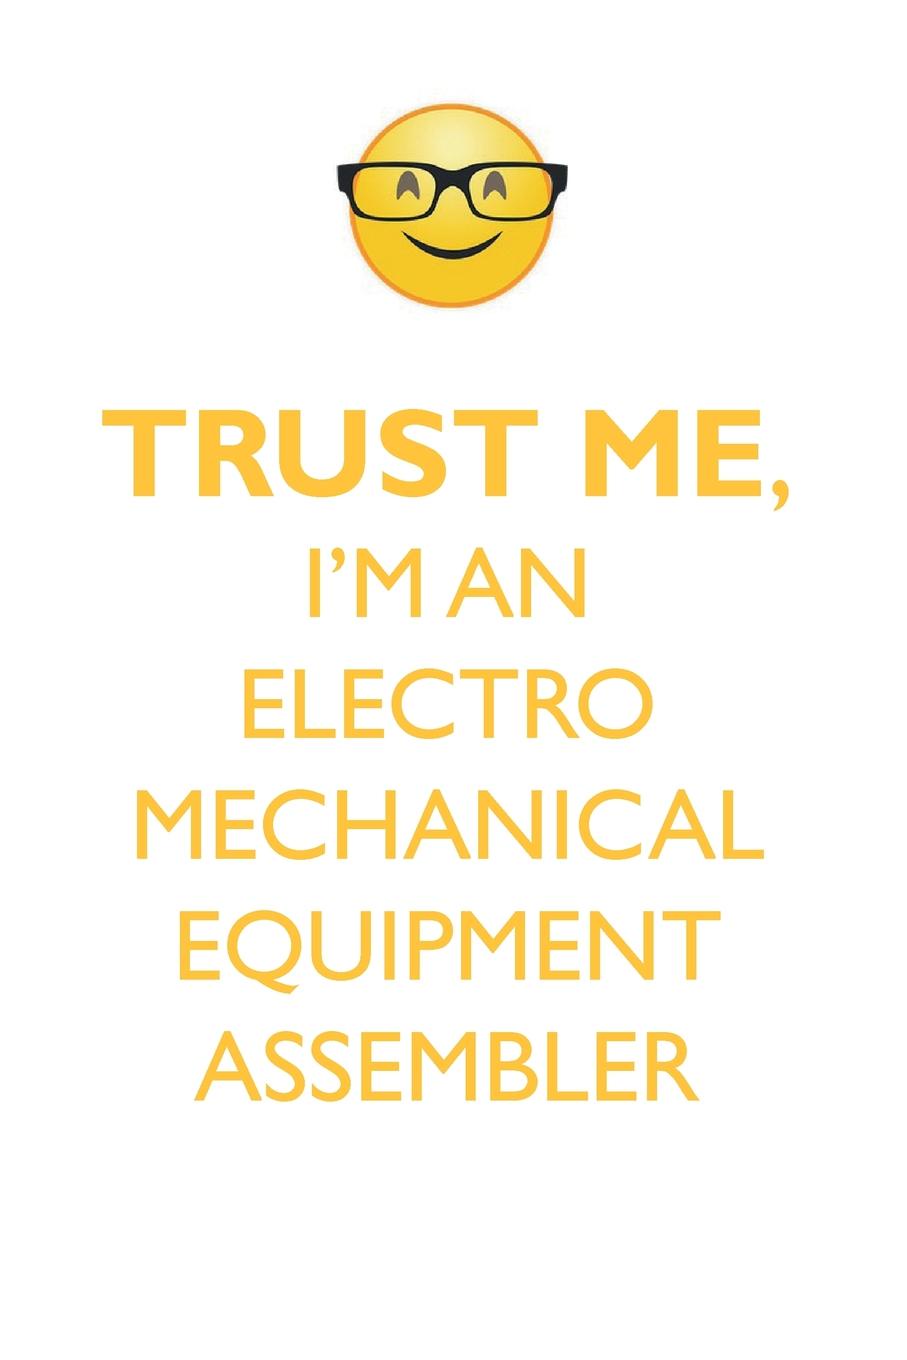 TRUST ME, I`M AN ELECTRO MECHANICAL EQUIPMENT ASSEMBLER AFFIRMATIONS WORKBOOK Positive Affirmations Workbook. Includes. Mentoring Questions, Guidance, Supporting You.